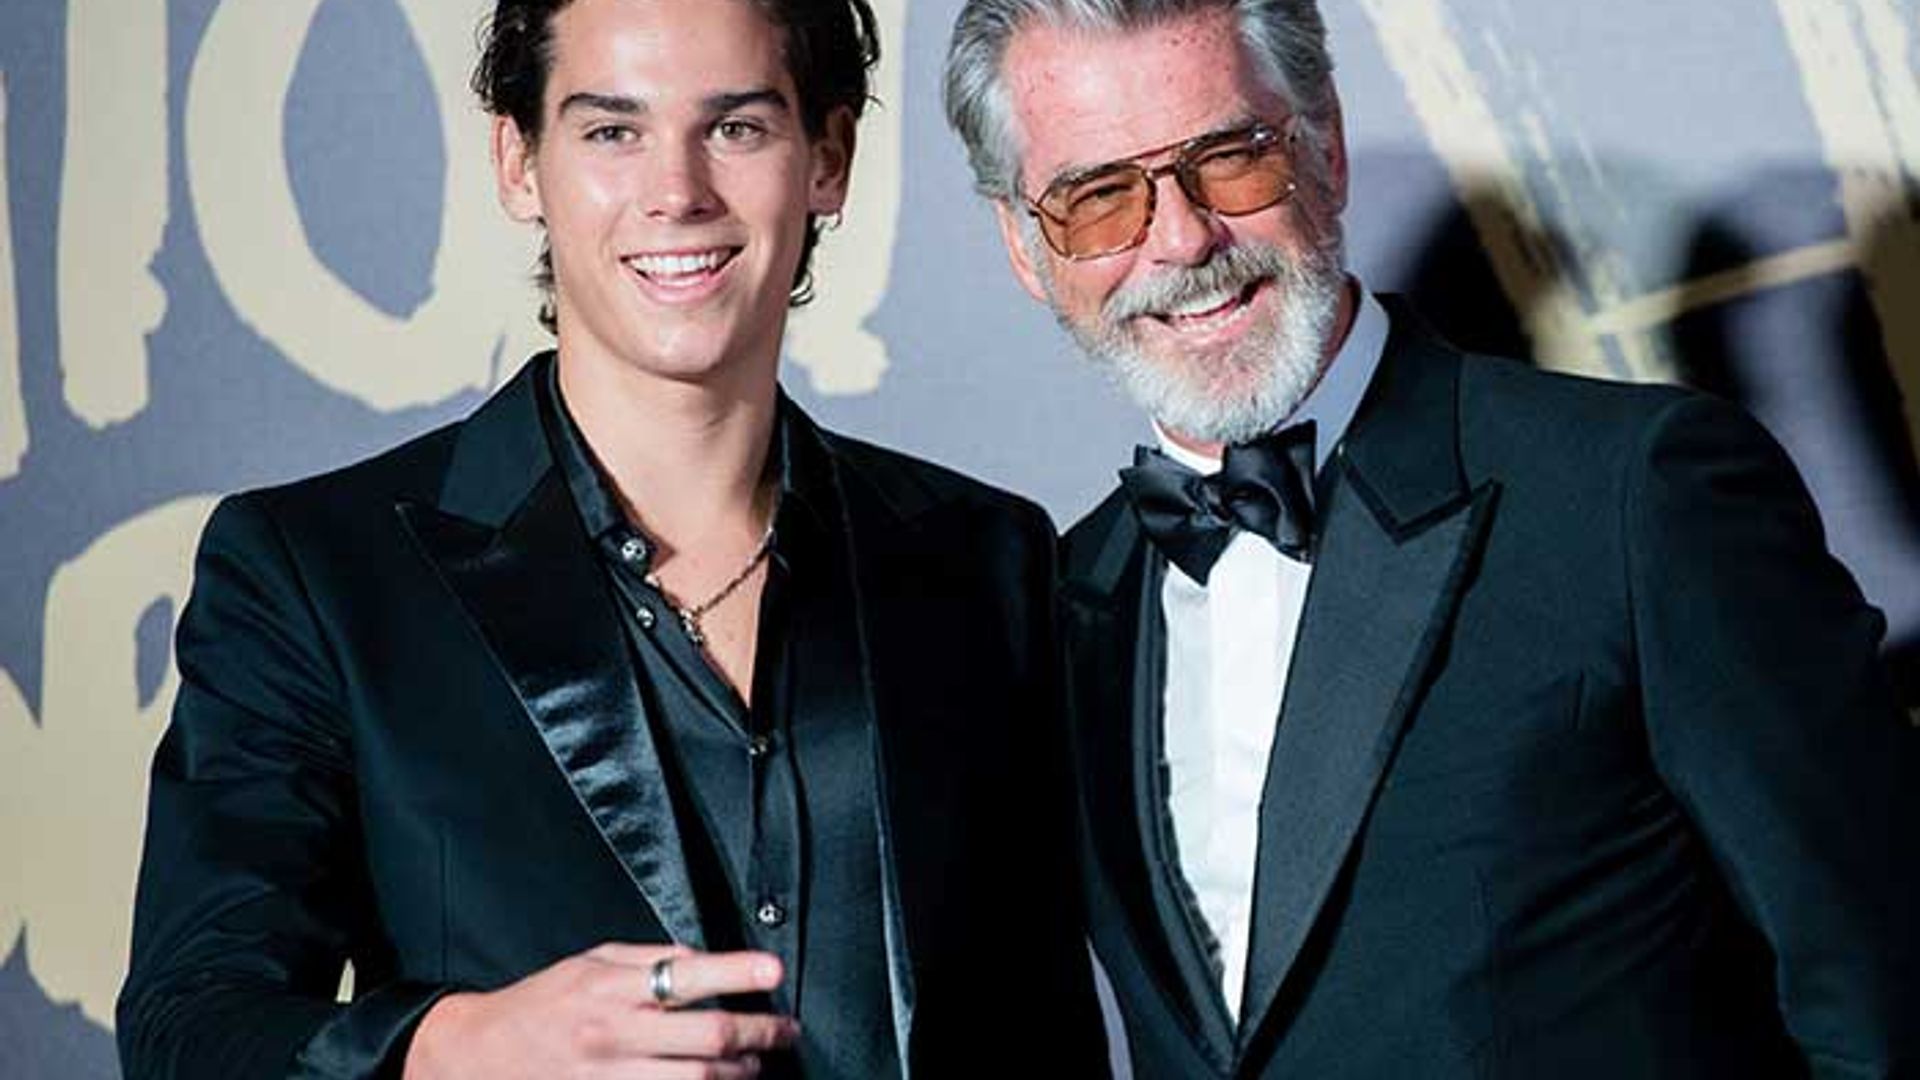 Pierce Brosnans lookalike son Paris steps out with his girlfriend Alex Lee-Aillon for loved up date